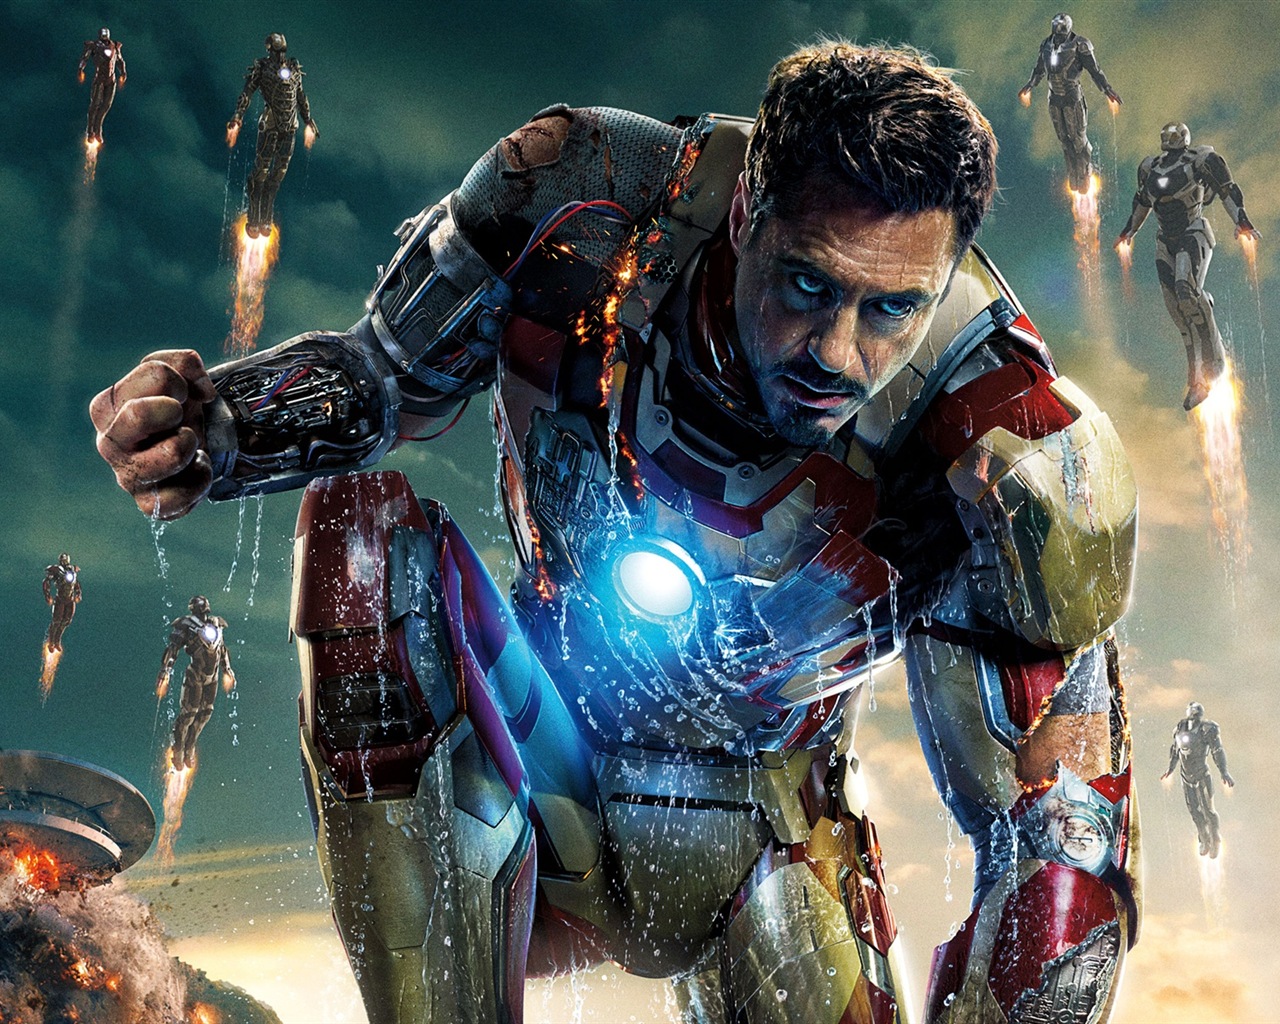 2013 Iron Man 3 newest HD wallpapers #12 - 1280x1024